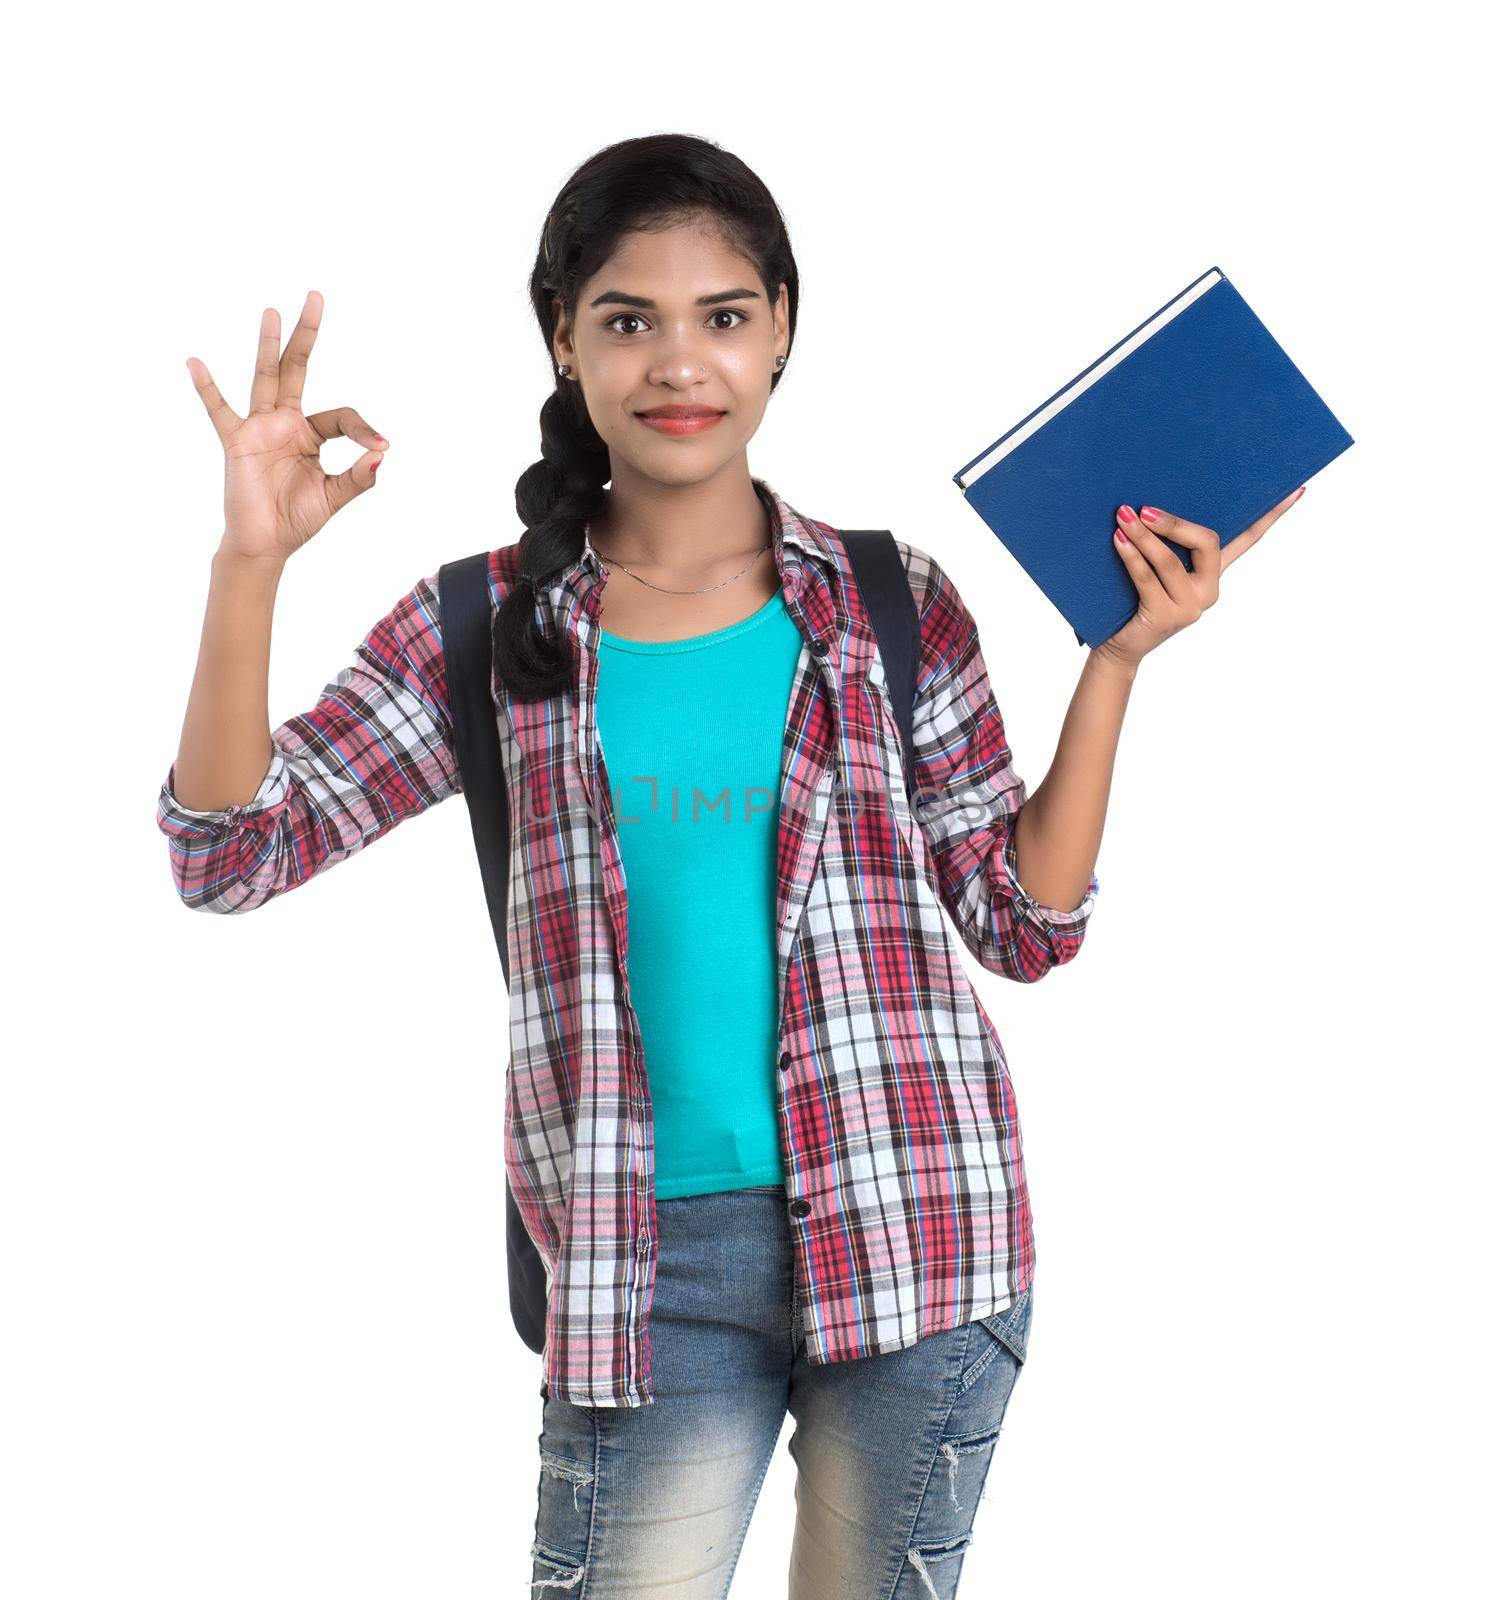 young Indian woman with backpack standing and holding notebooks, posing on a white background.